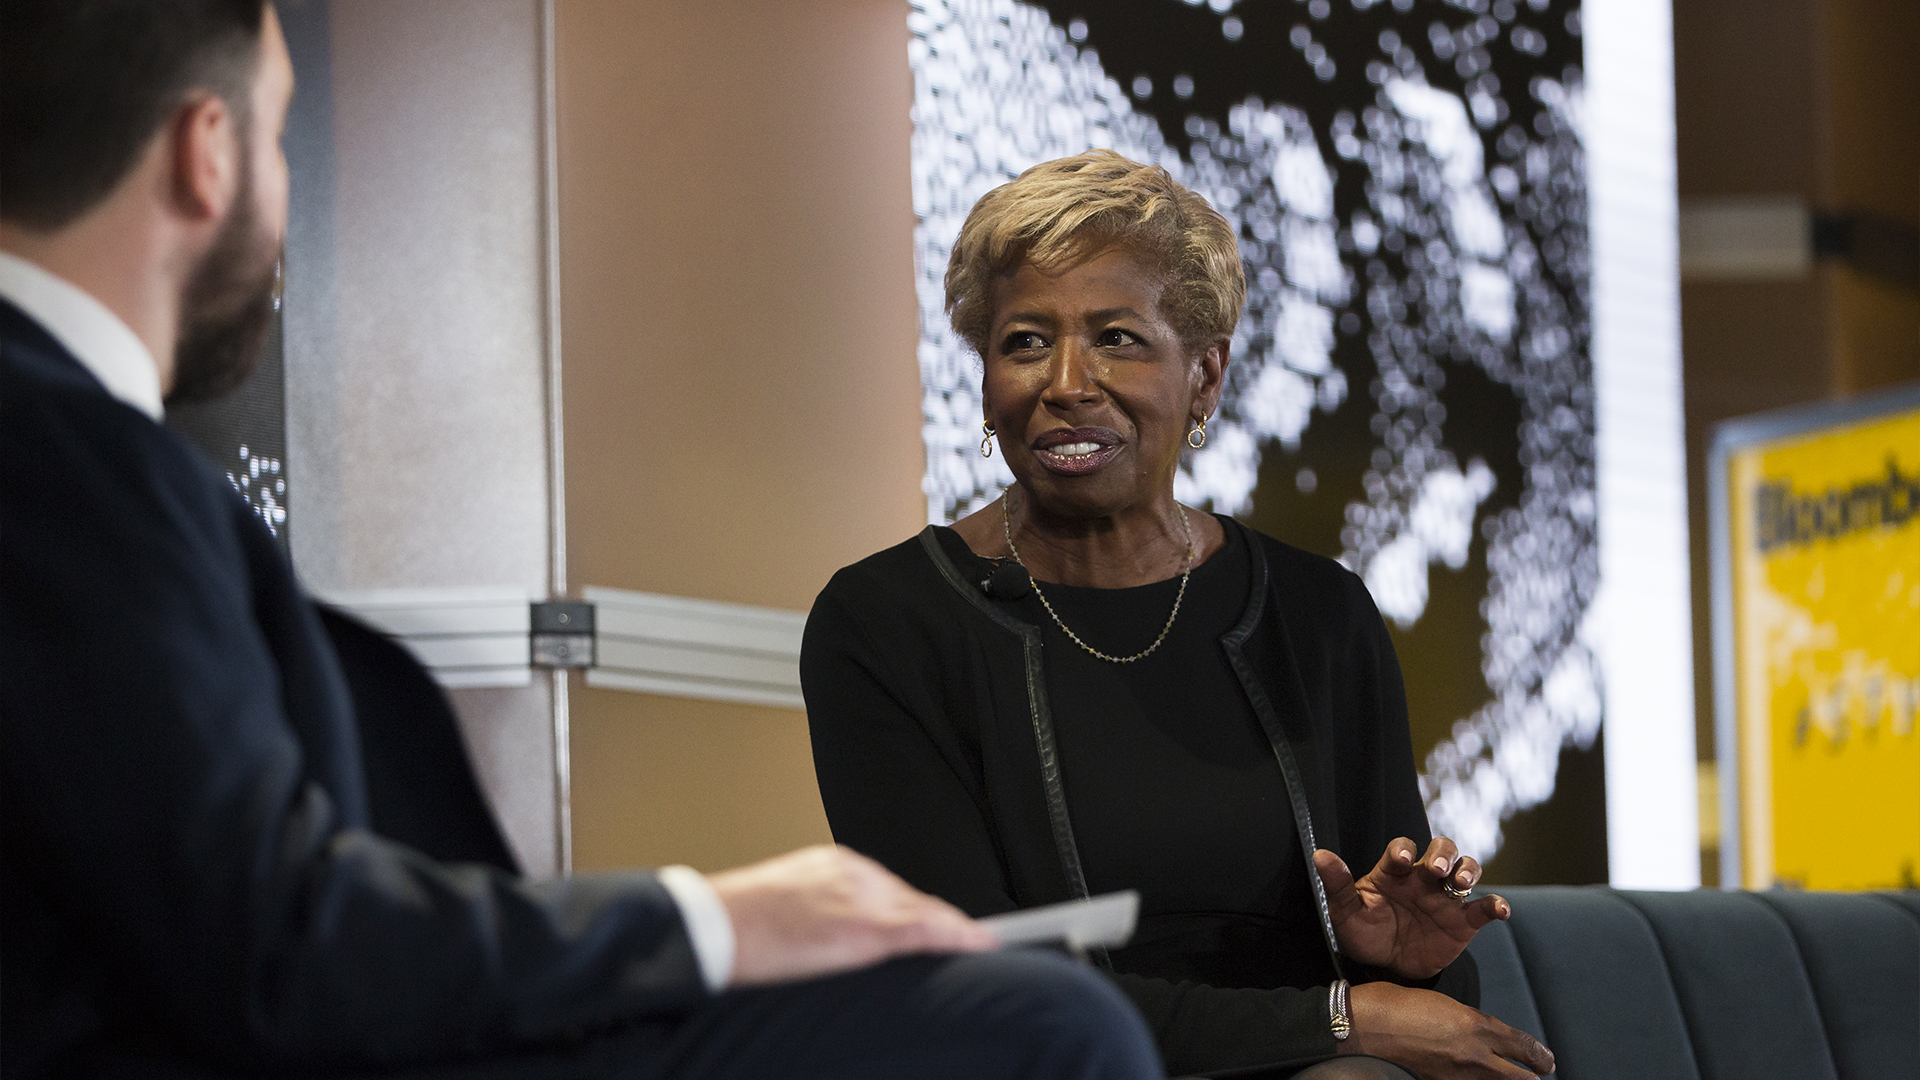 Sharon Bowen Breaks Barriers By Becoming The First Black Woman To Chair The NYSE Board